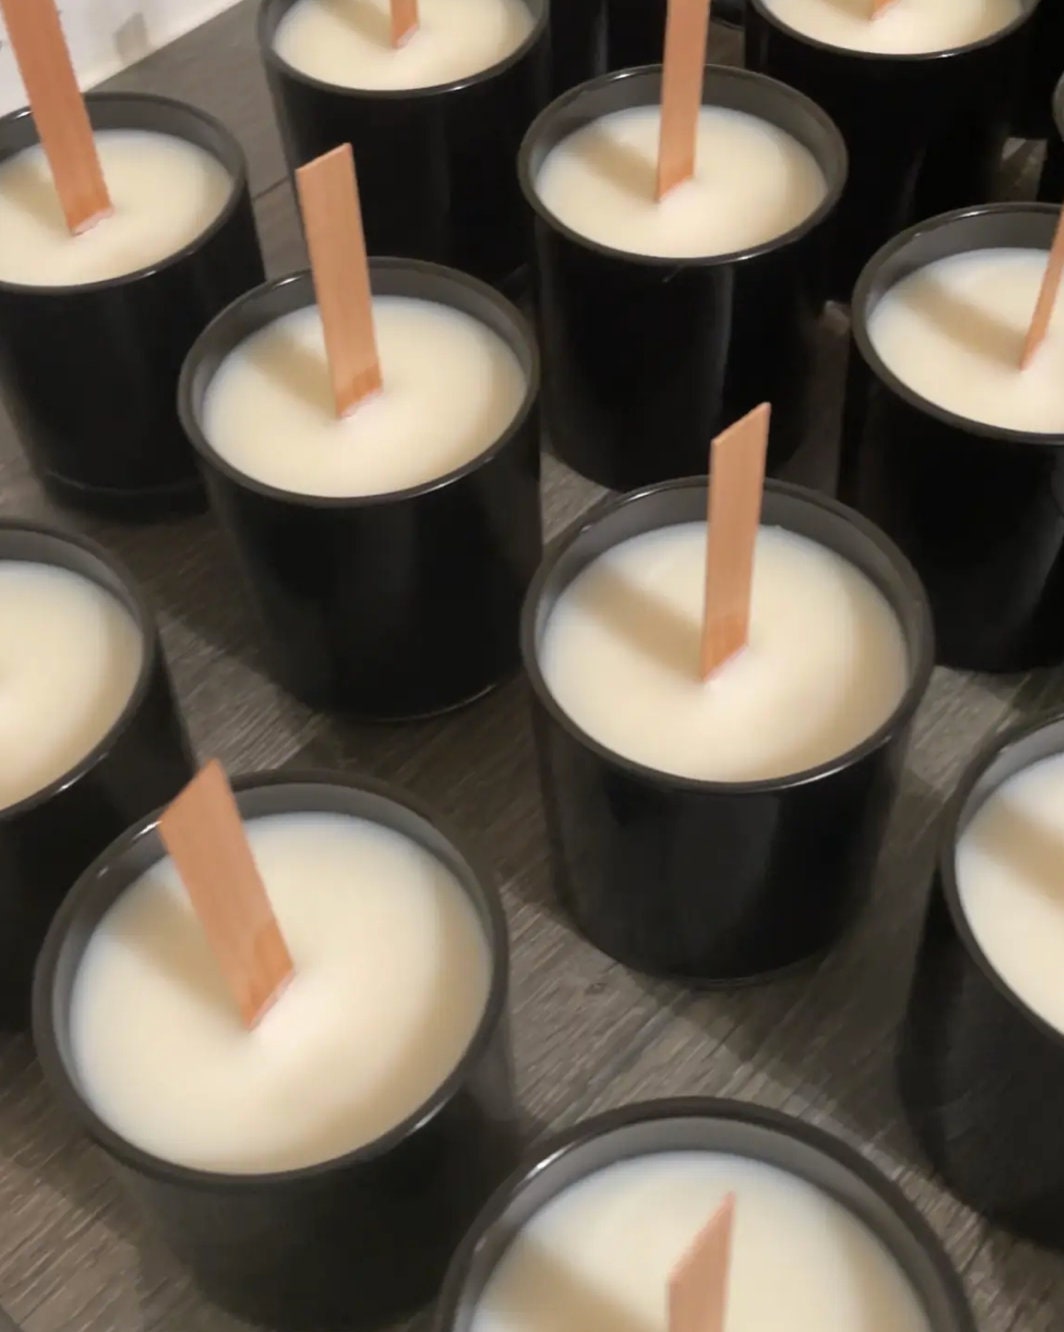 Set of 12 Wholesale Soy Wax Wood Wick Candles Soy Candles for